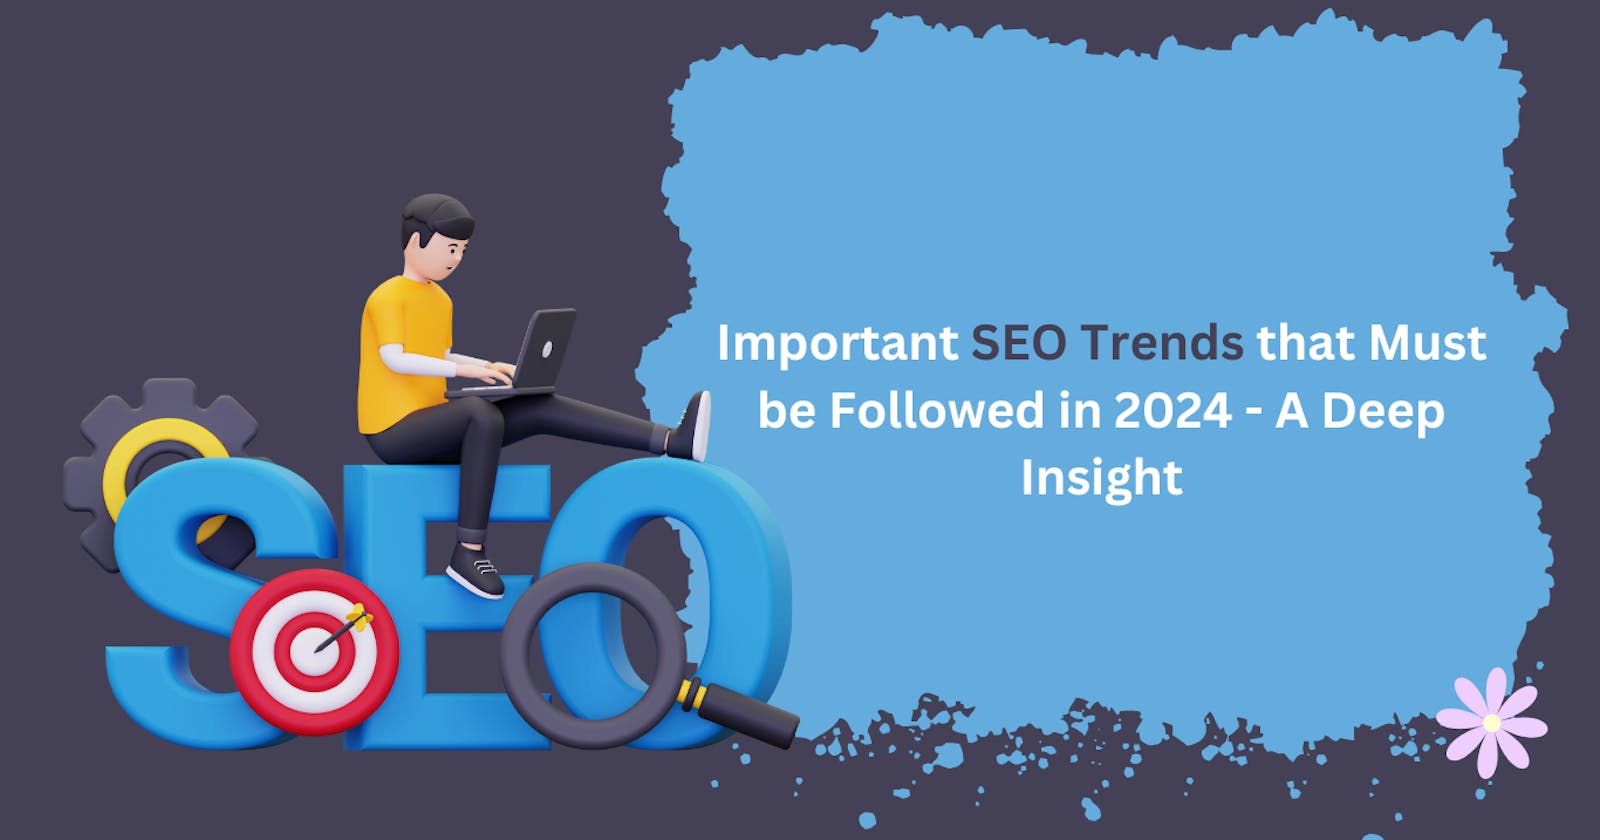 Important SEO Trends that Must be Followed in 2024 - A Deep Insight